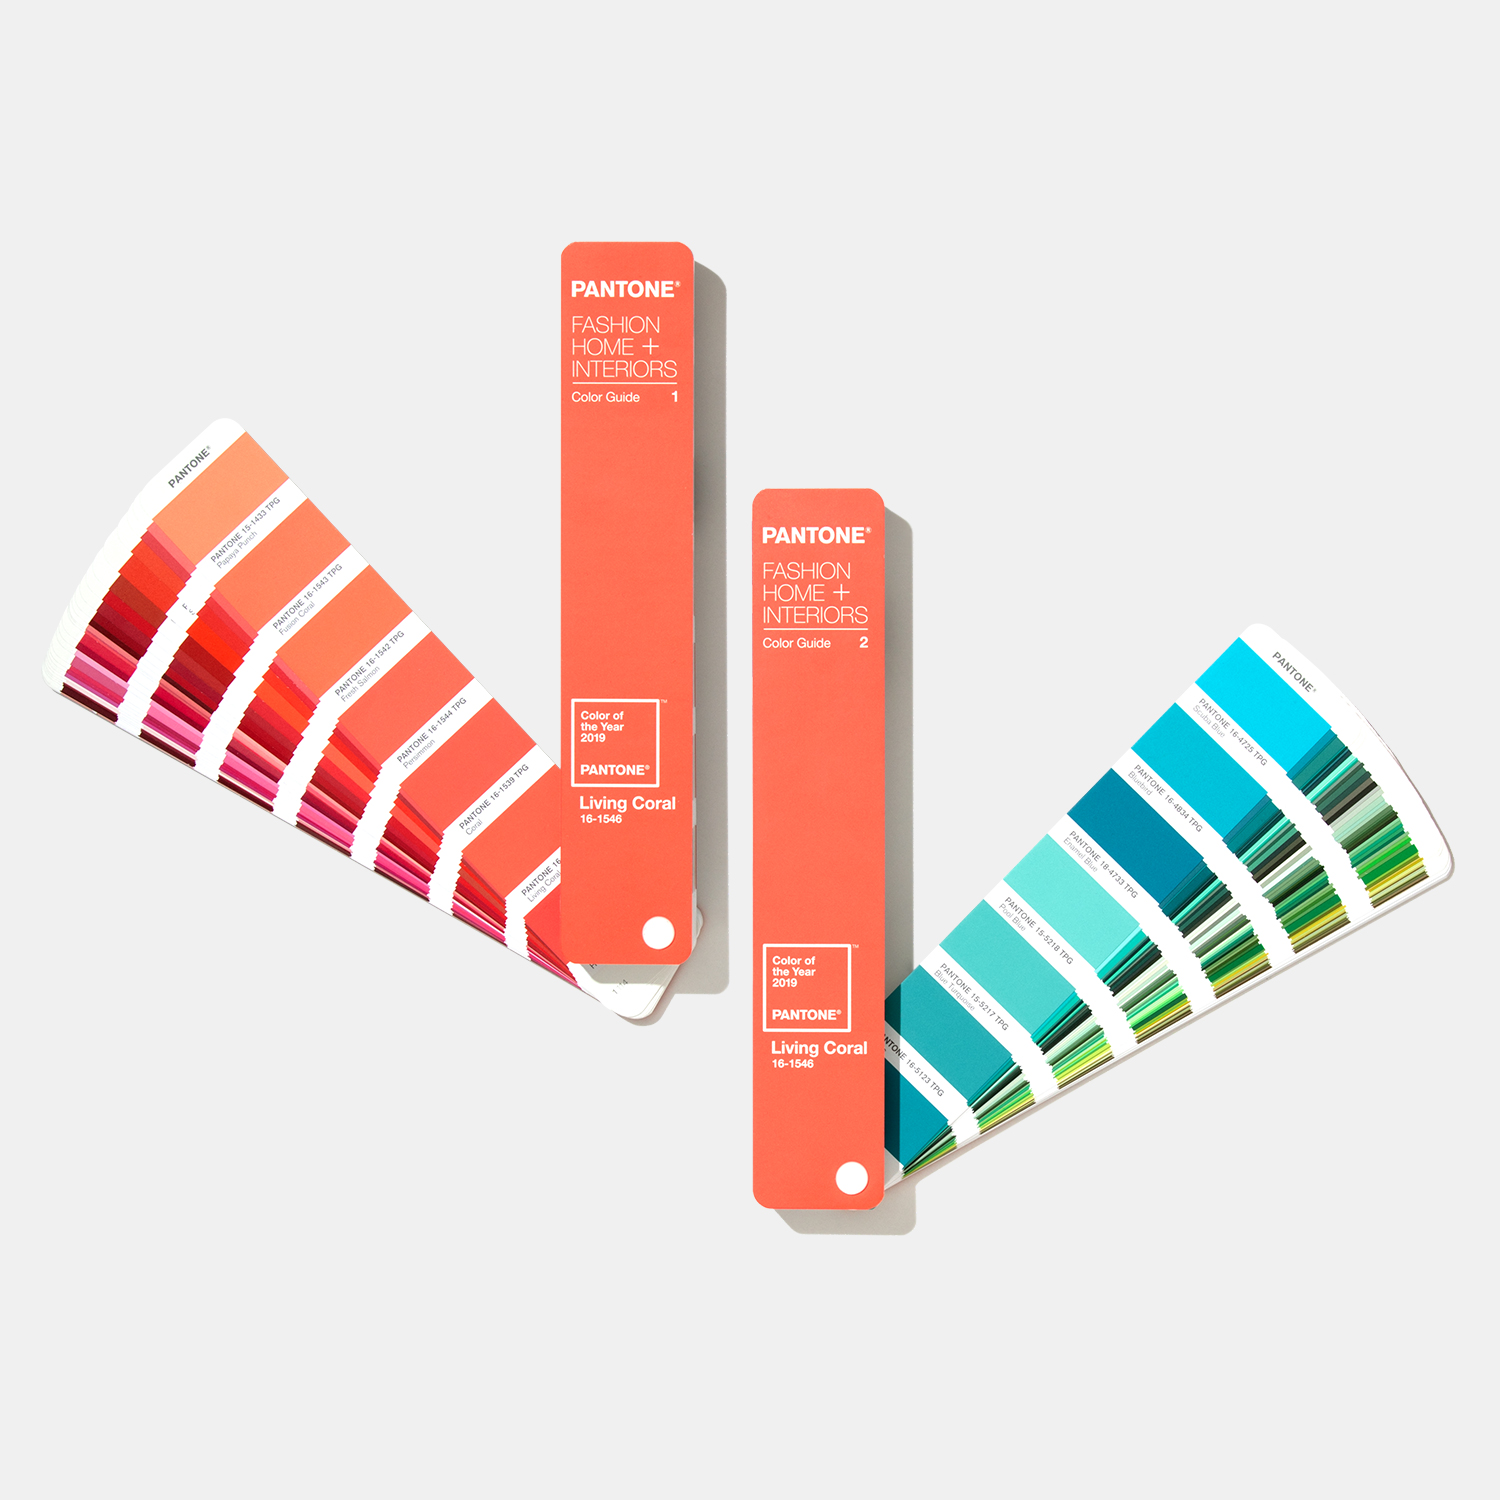 COY-pantone-fashion-home-interiors-tpg-limited-edition-color-of-the-year-2019-color-fan-deck-color-guide-1